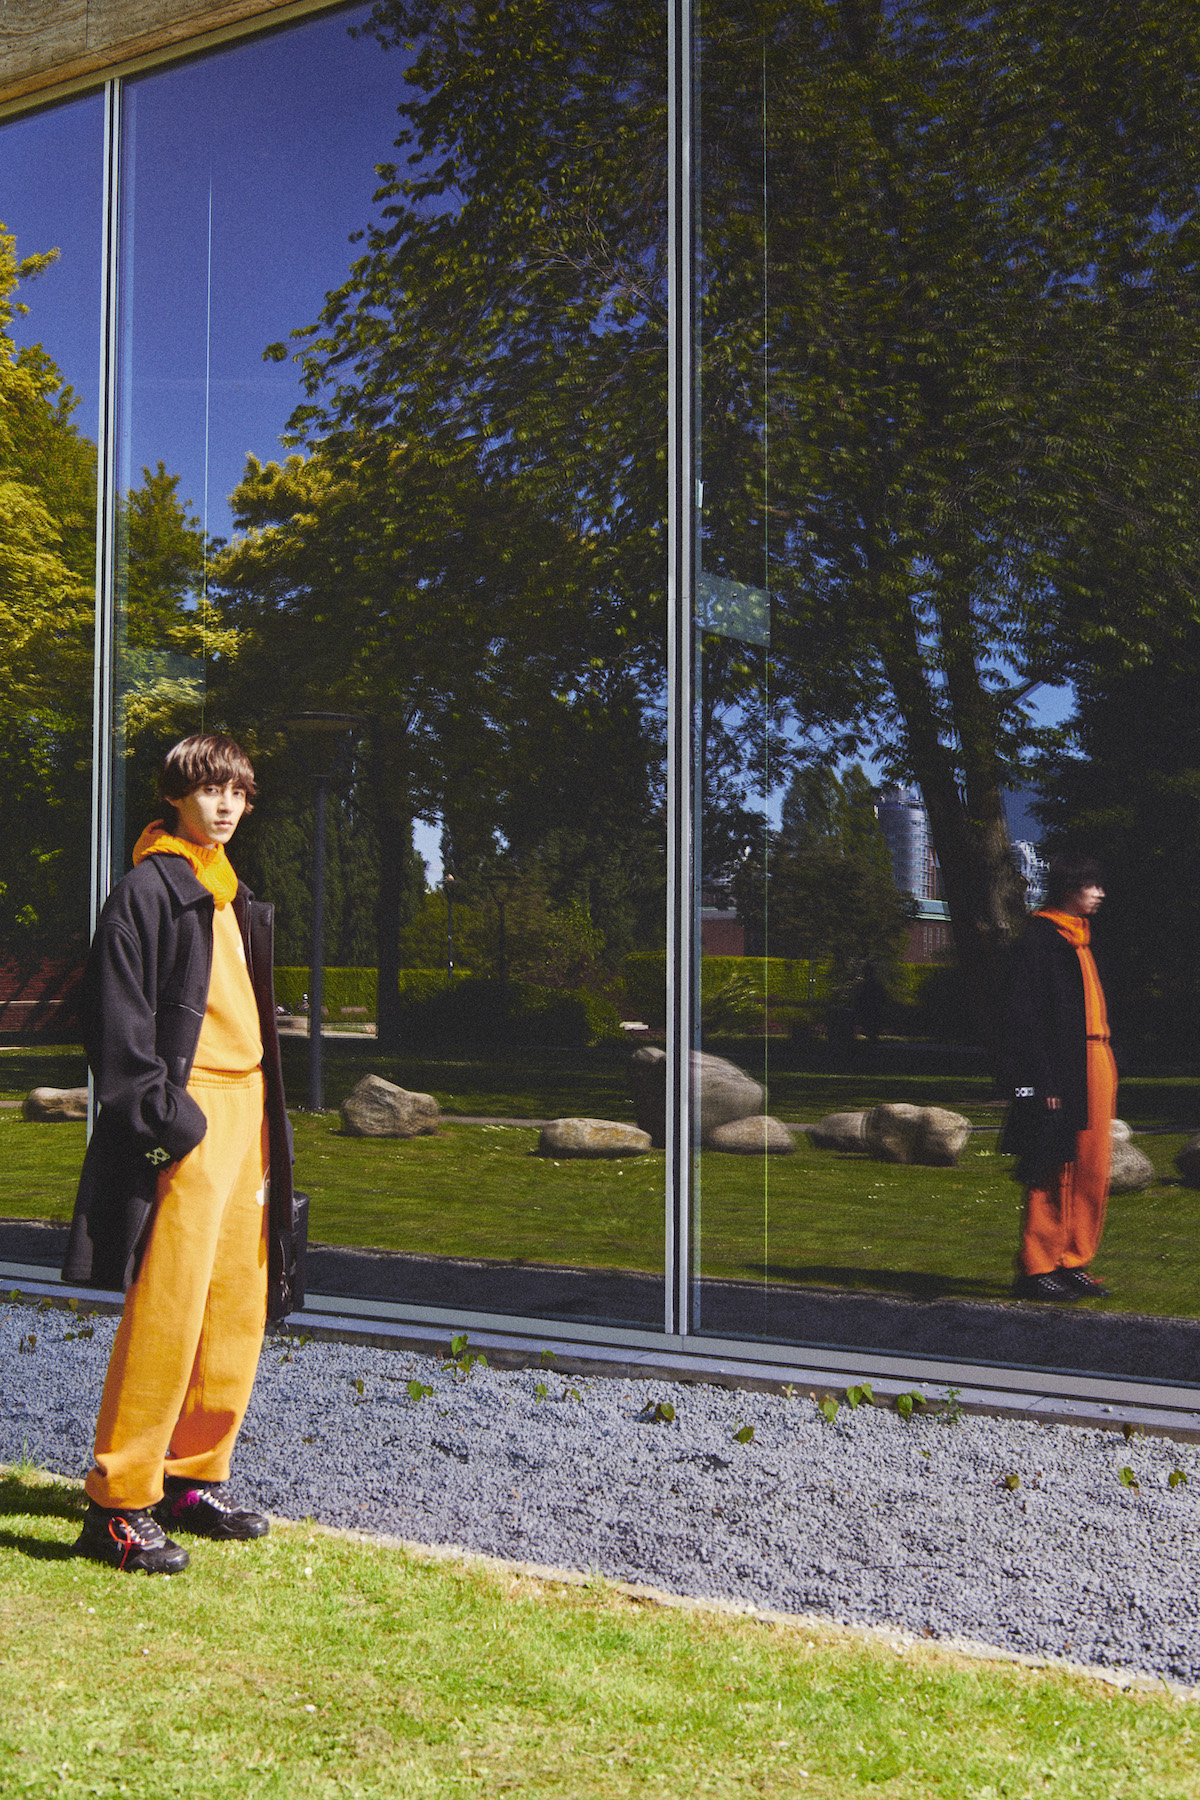 OFF-WHITE Unveils “RATIONALISM” Resort 2020 Men’s Collection